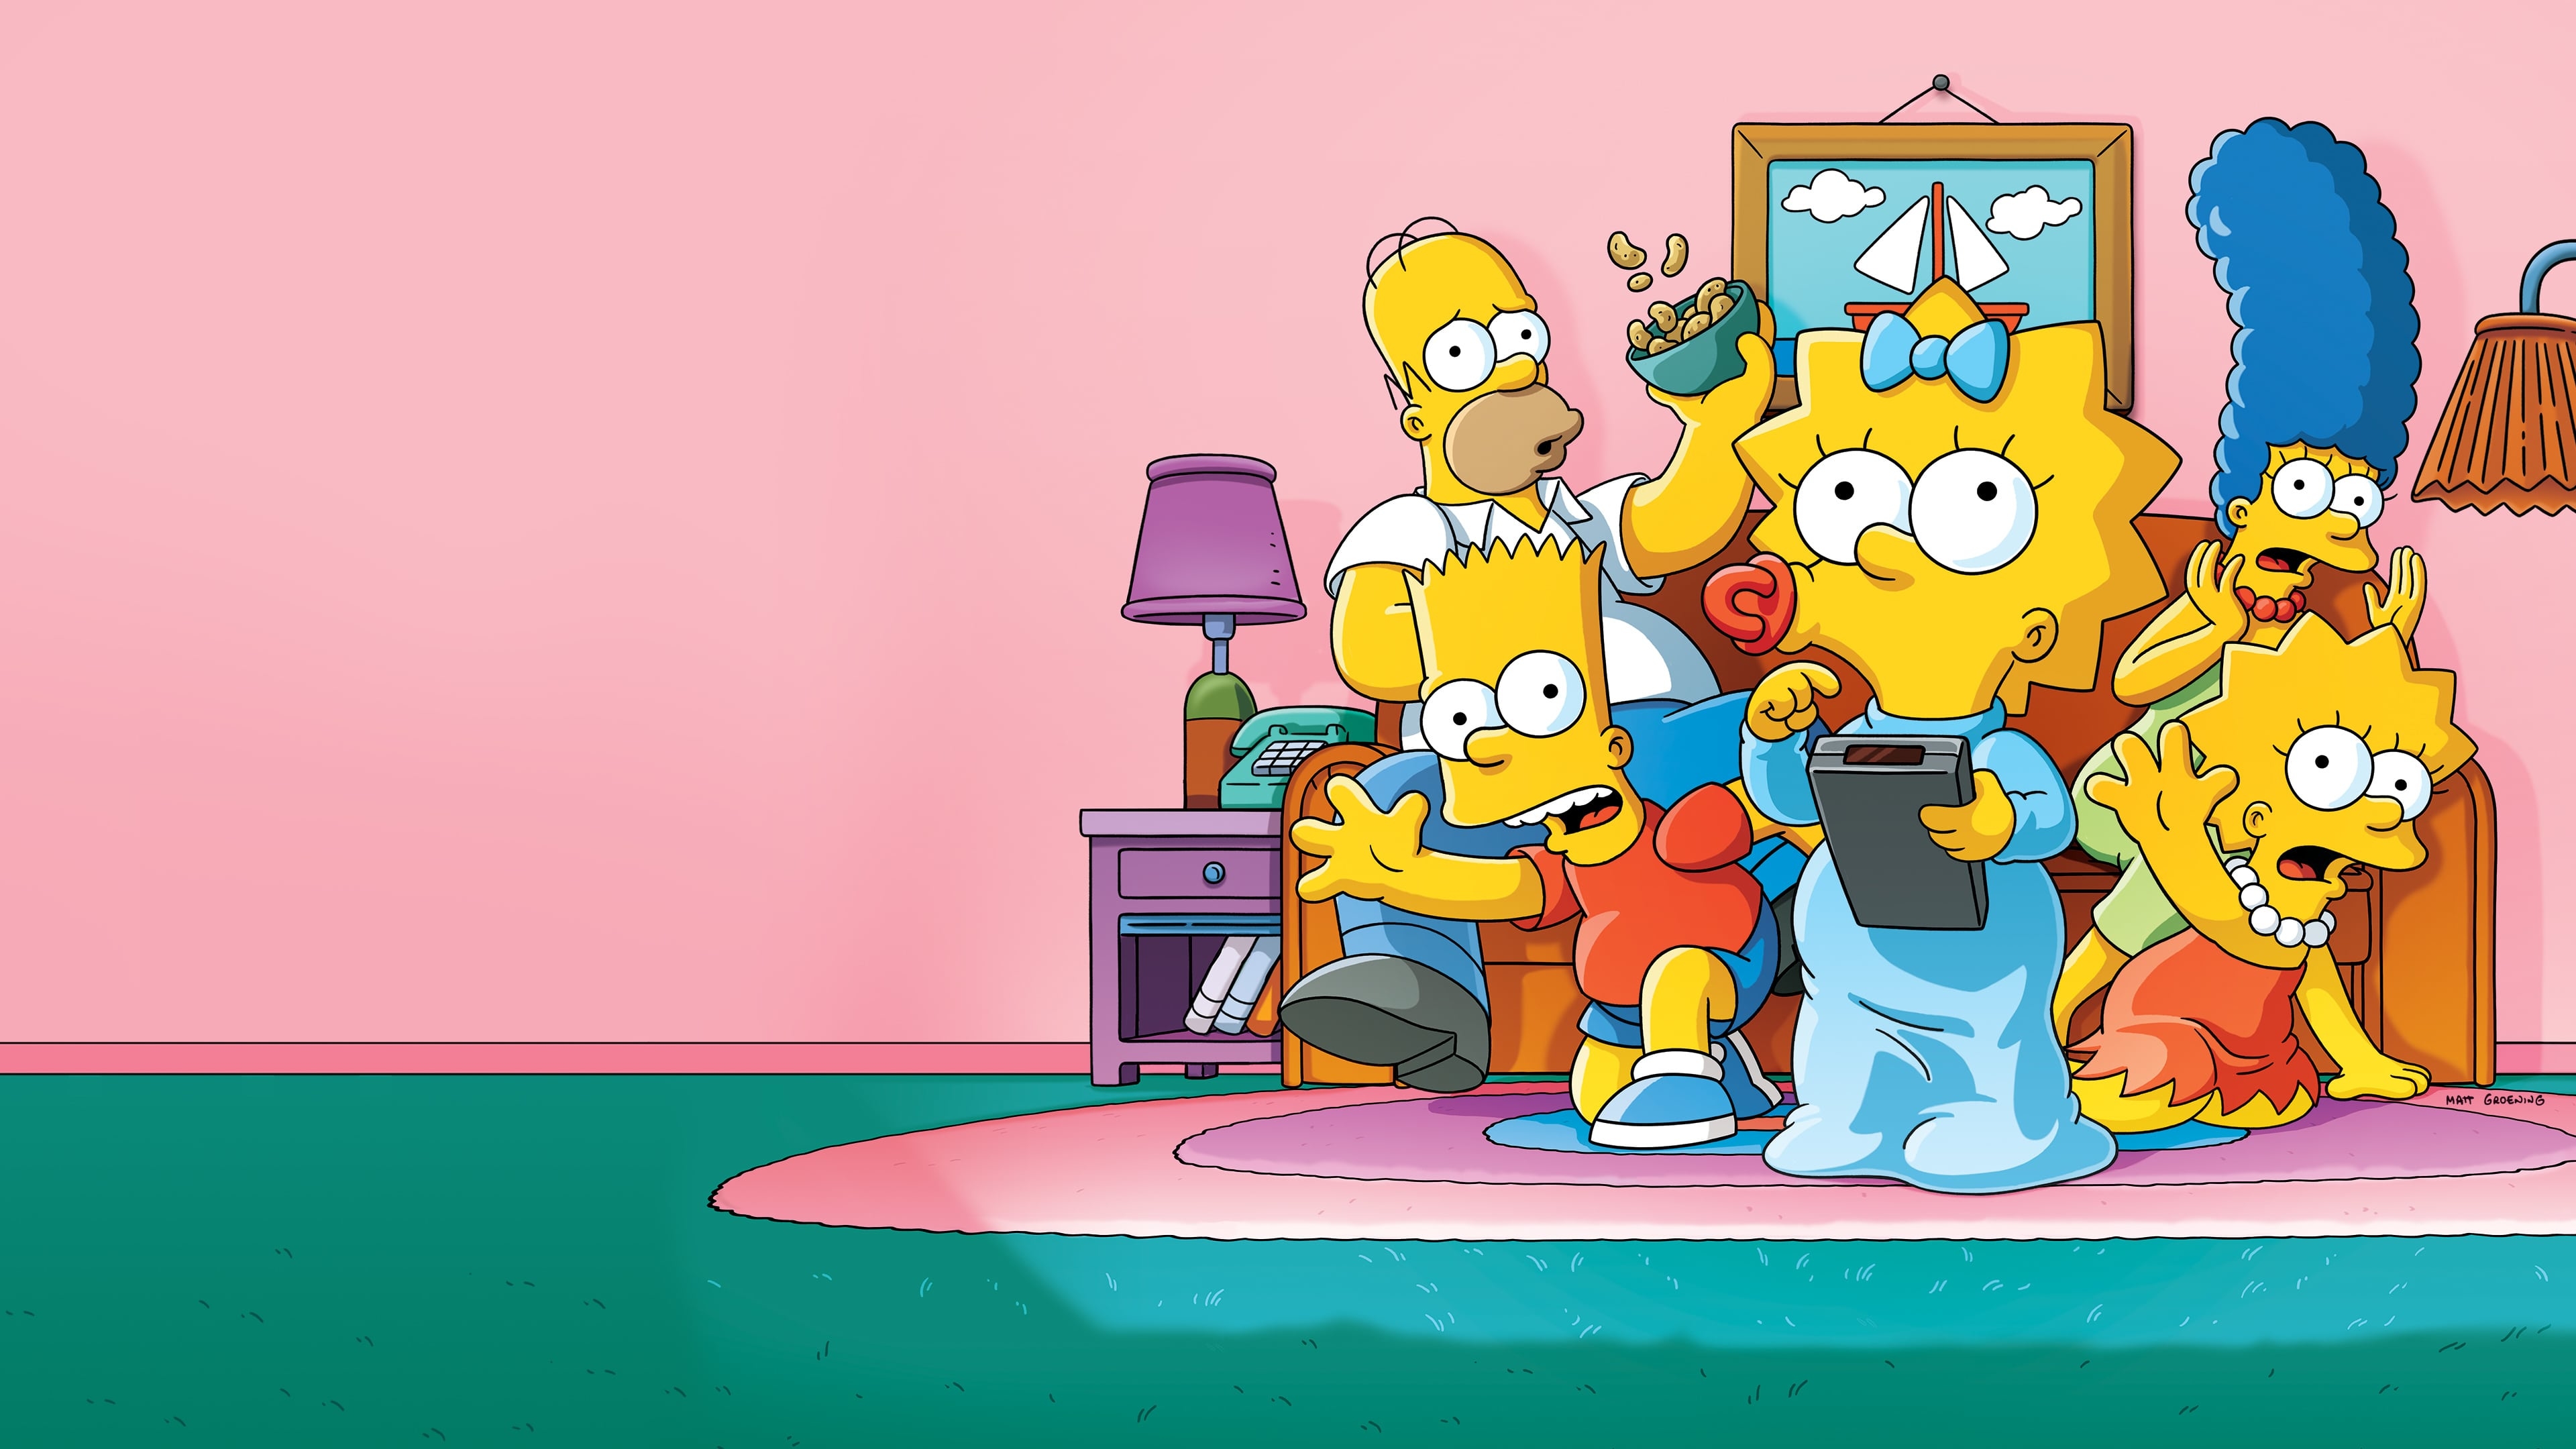 3840x The Simpsons 4k 3840x Resolution Wallpaper Hd Tv Series 4k Wallpapers Images Photos And Background Wallpapers Den